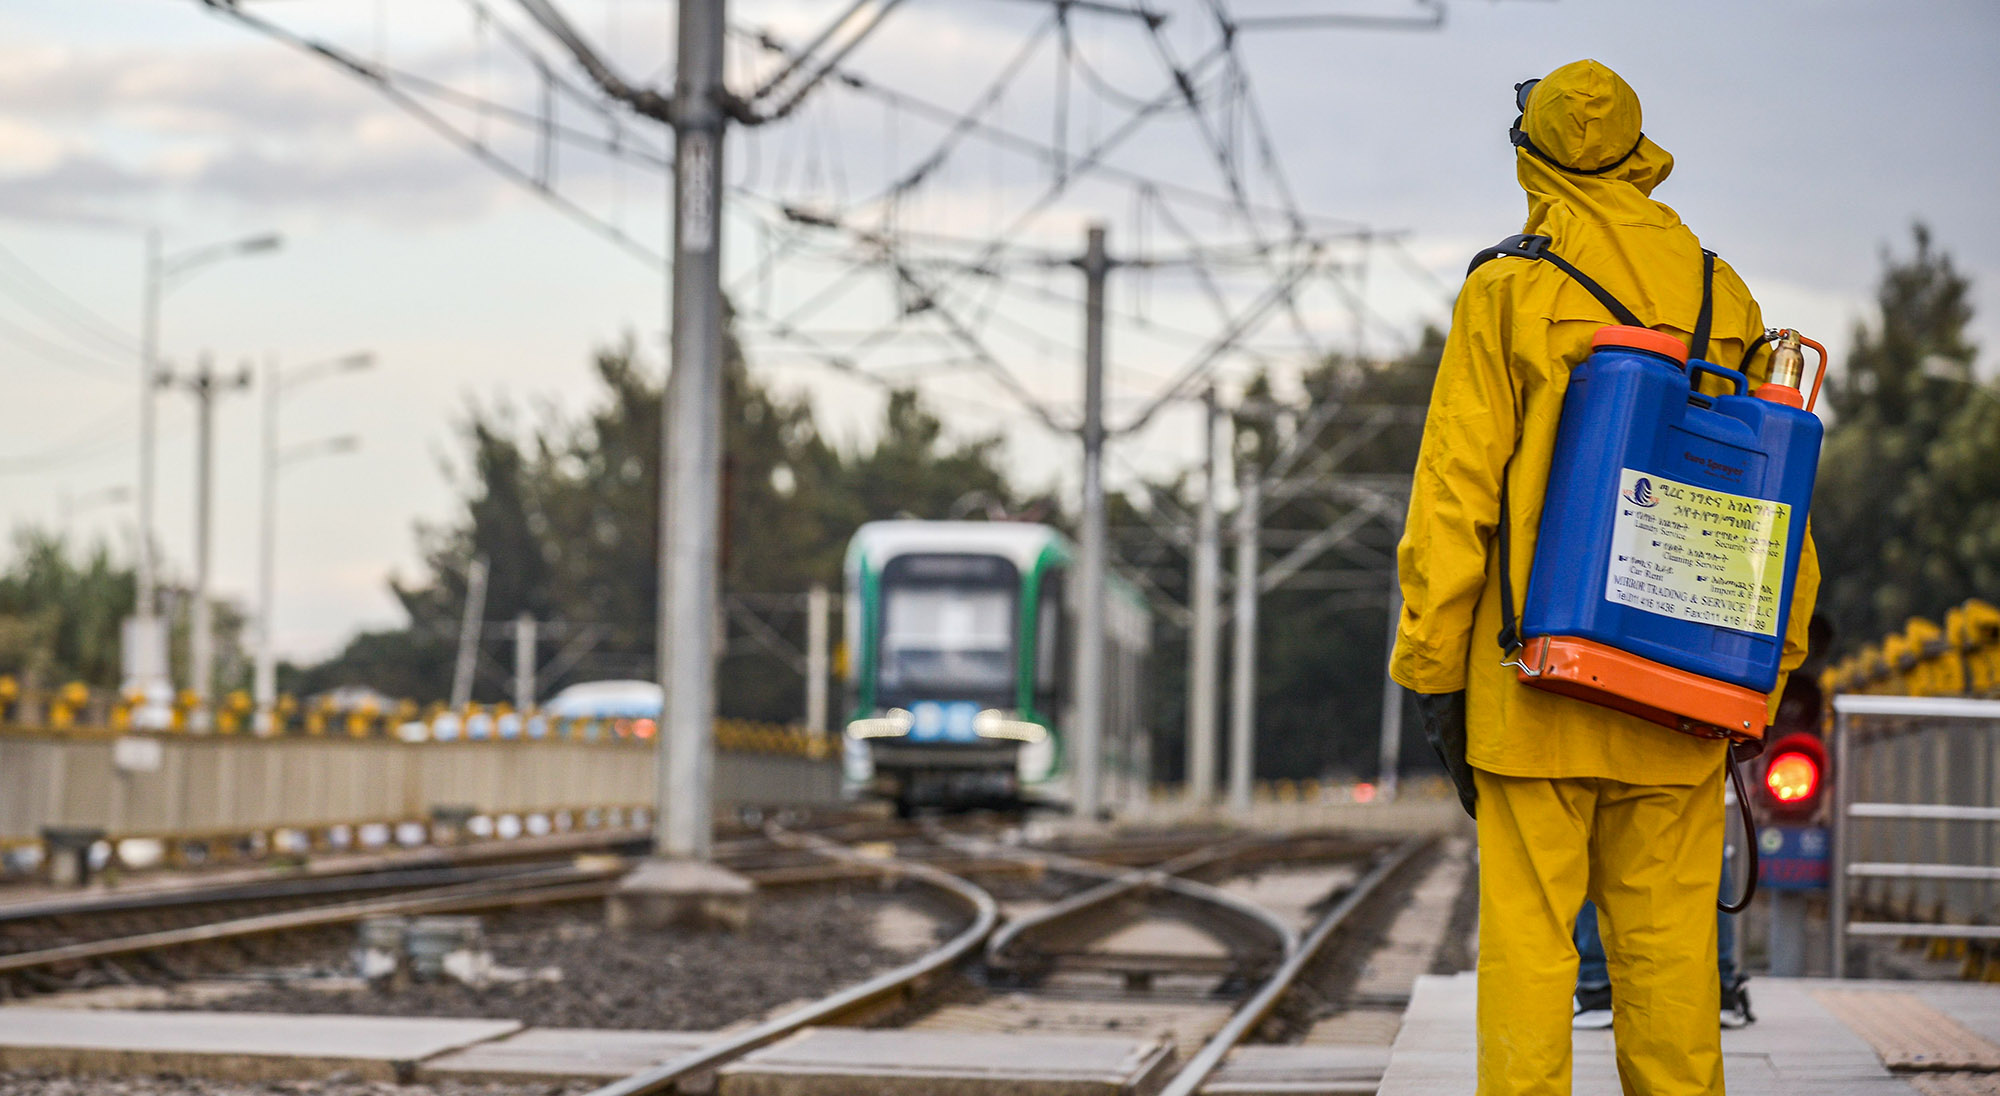 A worker waits to disinfect a metro carriage&nbsp;in Addis Ababa, Ethiopia, on March 20.